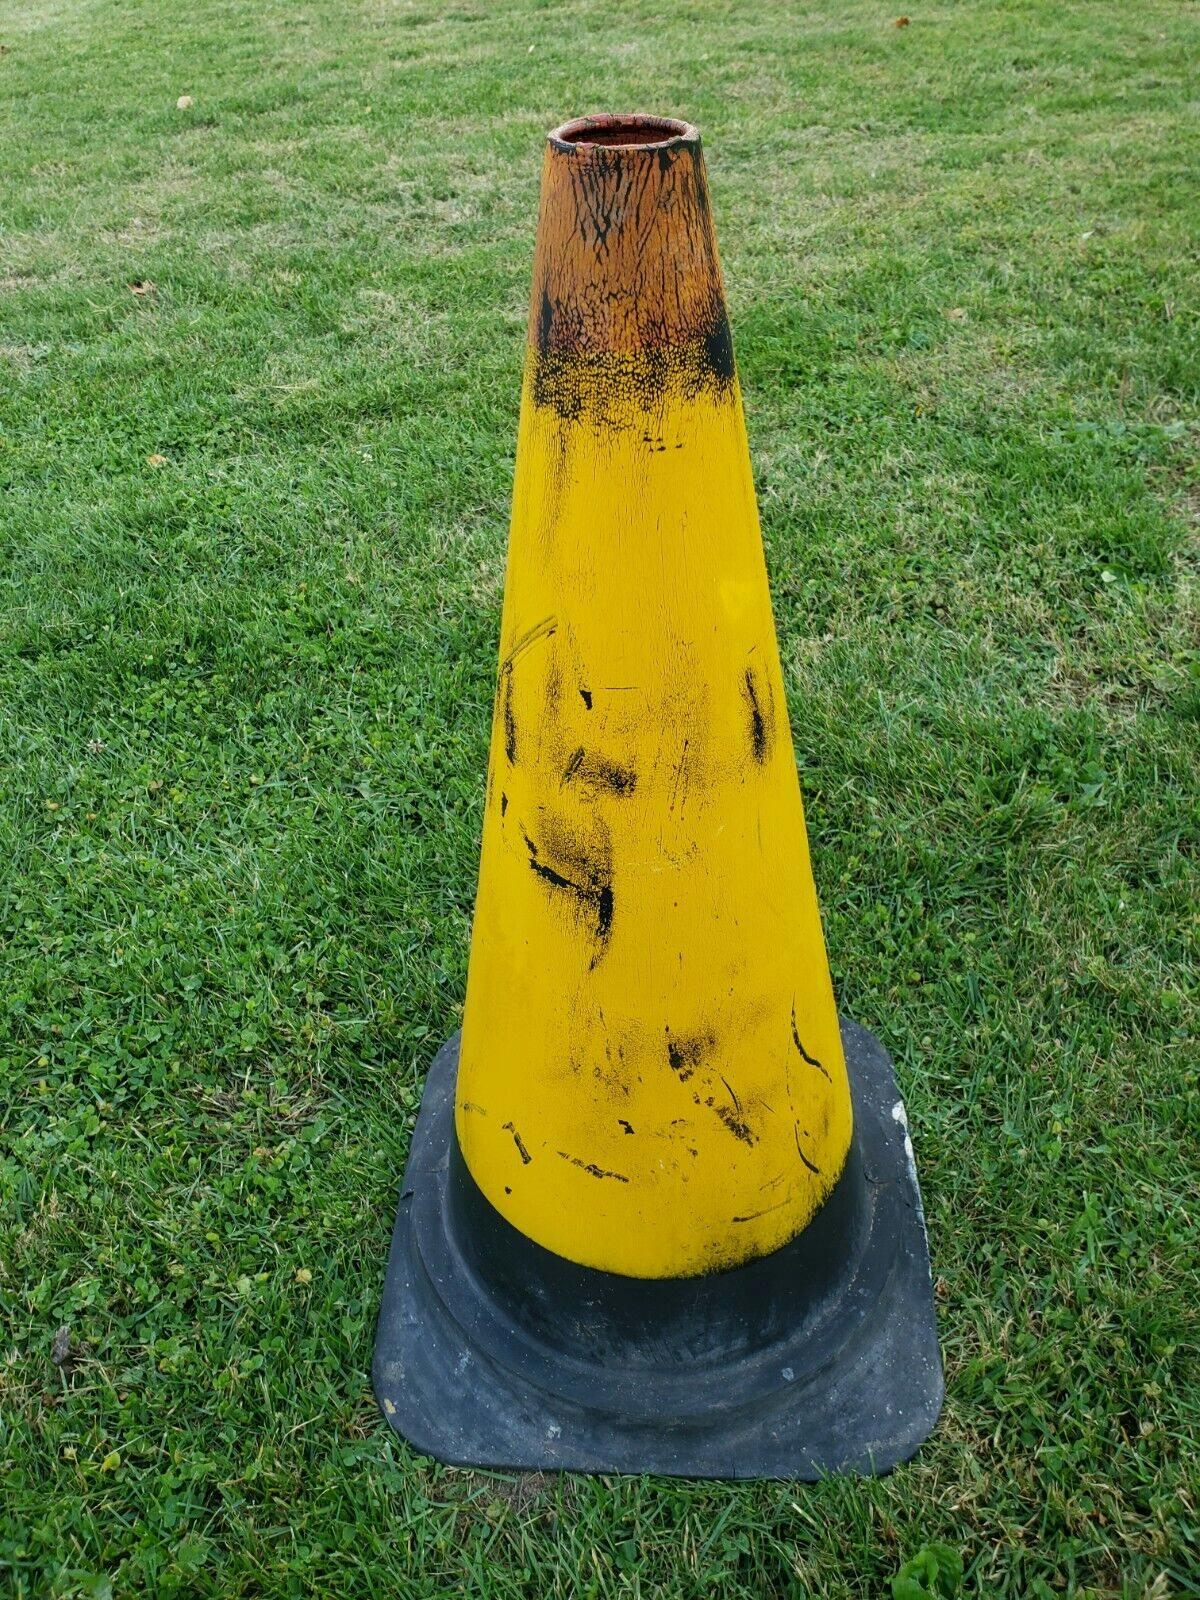 28-Inch Traffic Cone Road Safety Marker Interstate Rubber California Antique vertical